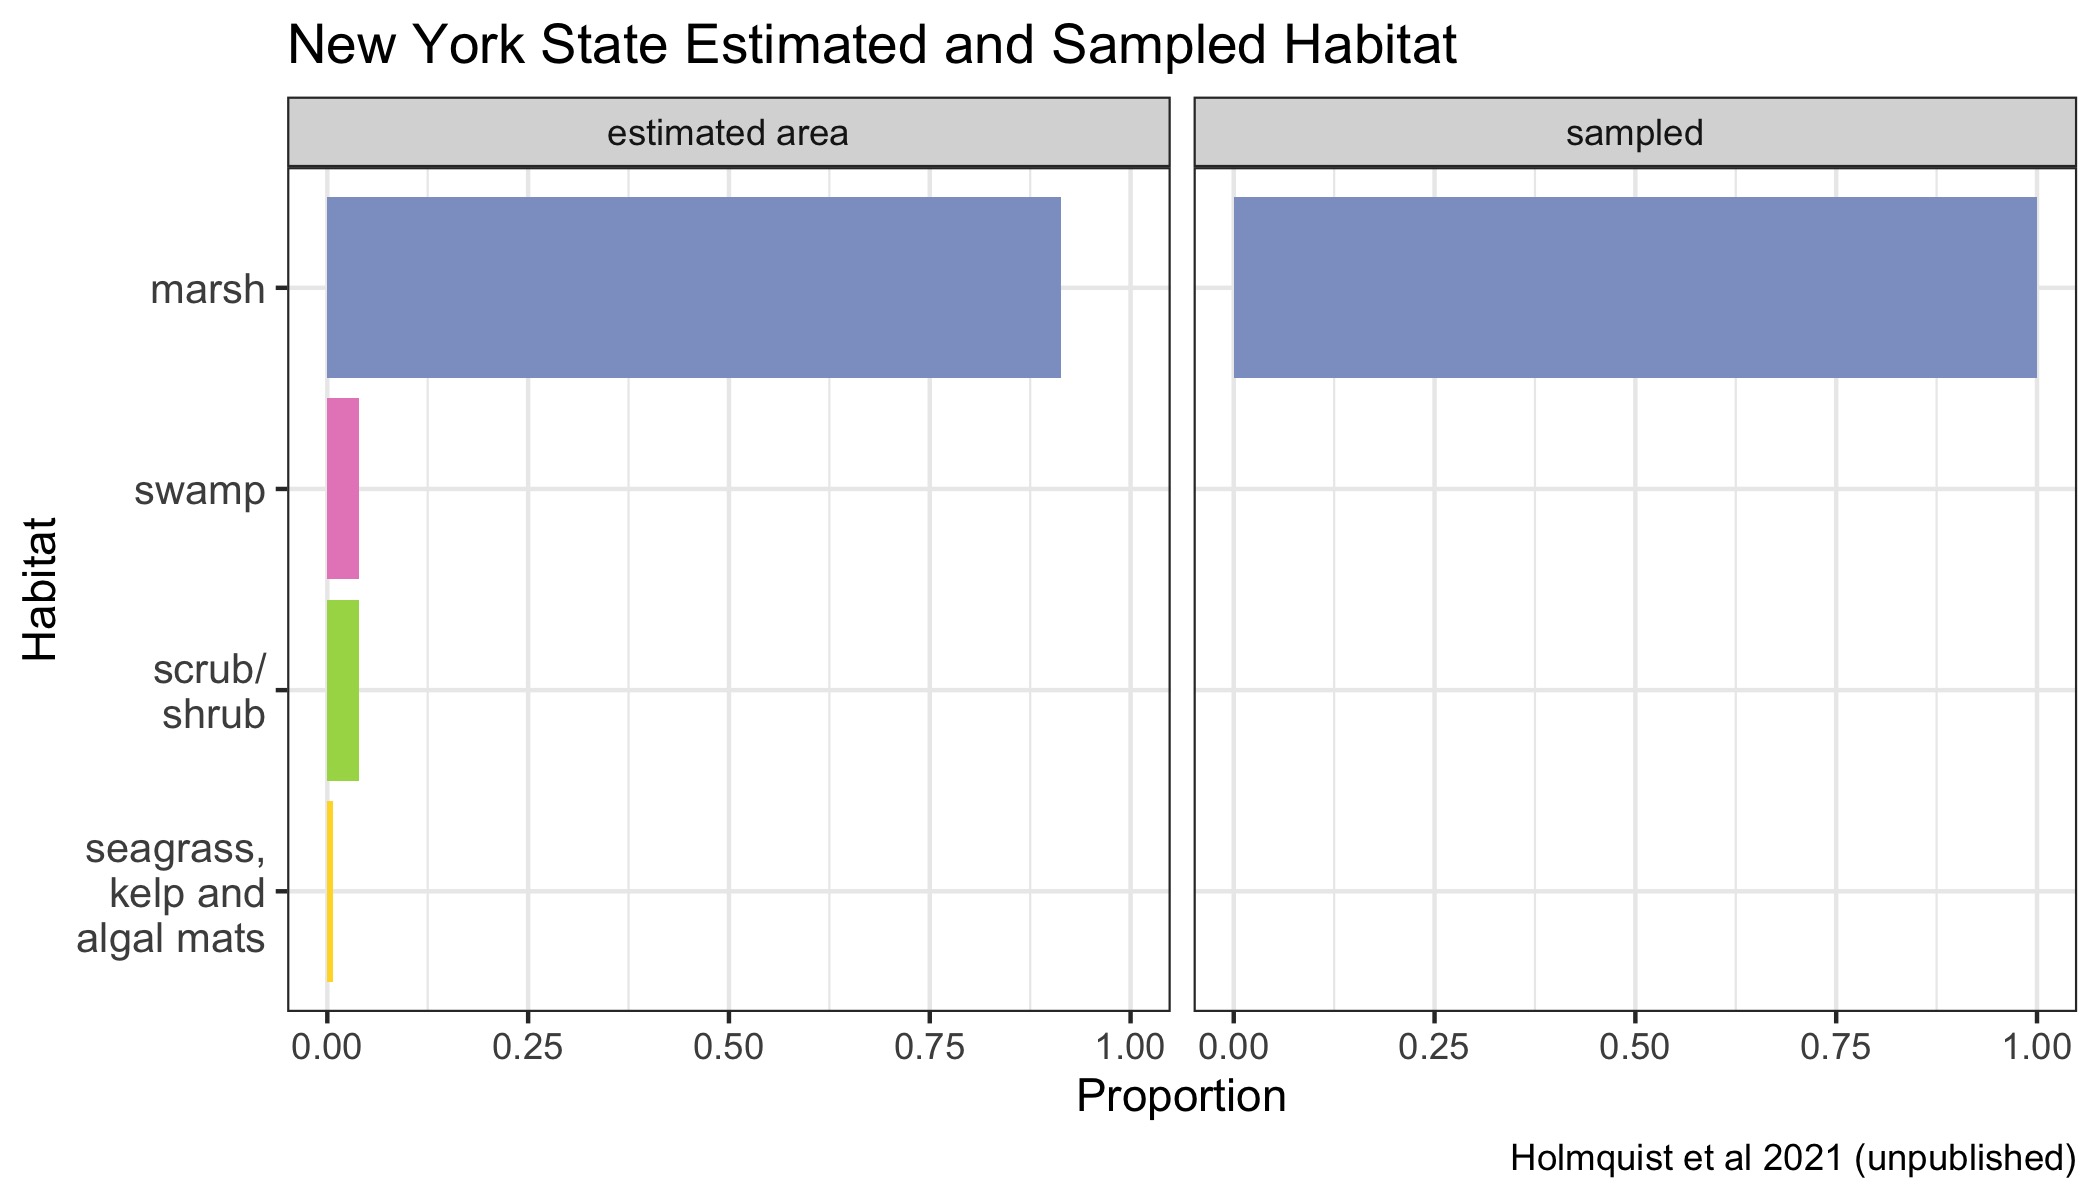 Proportions of various Blue Carbon habitats across New York state represented in the dataset in proportion to their estimated area. Seagrasses, kelp beds and algal mats are all combined into a single category, because they are combined in the underlying mapping products.